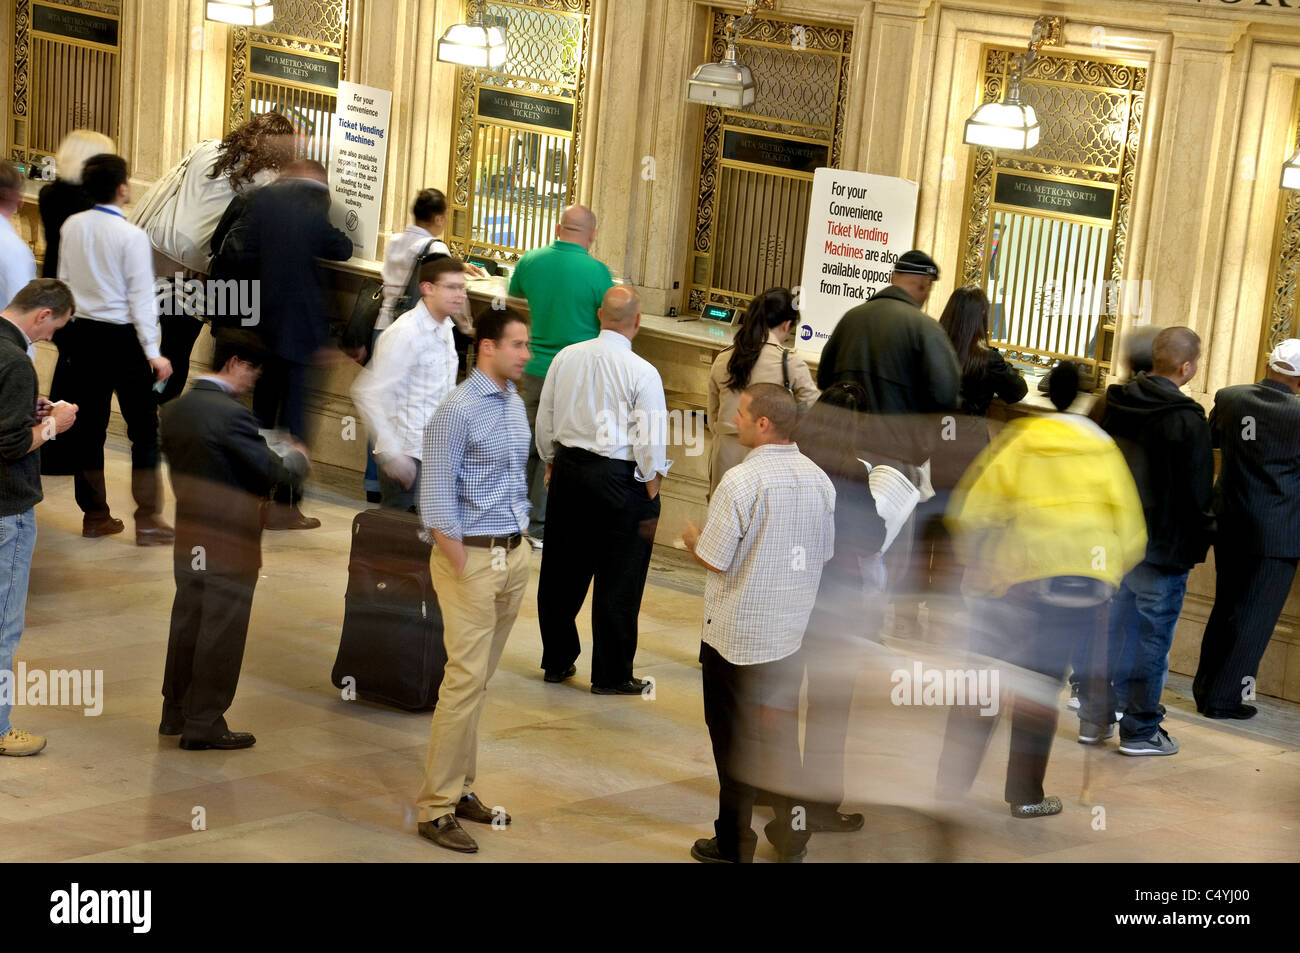 Grand Central Terminal, 42nd Street, New York City Stock Photo